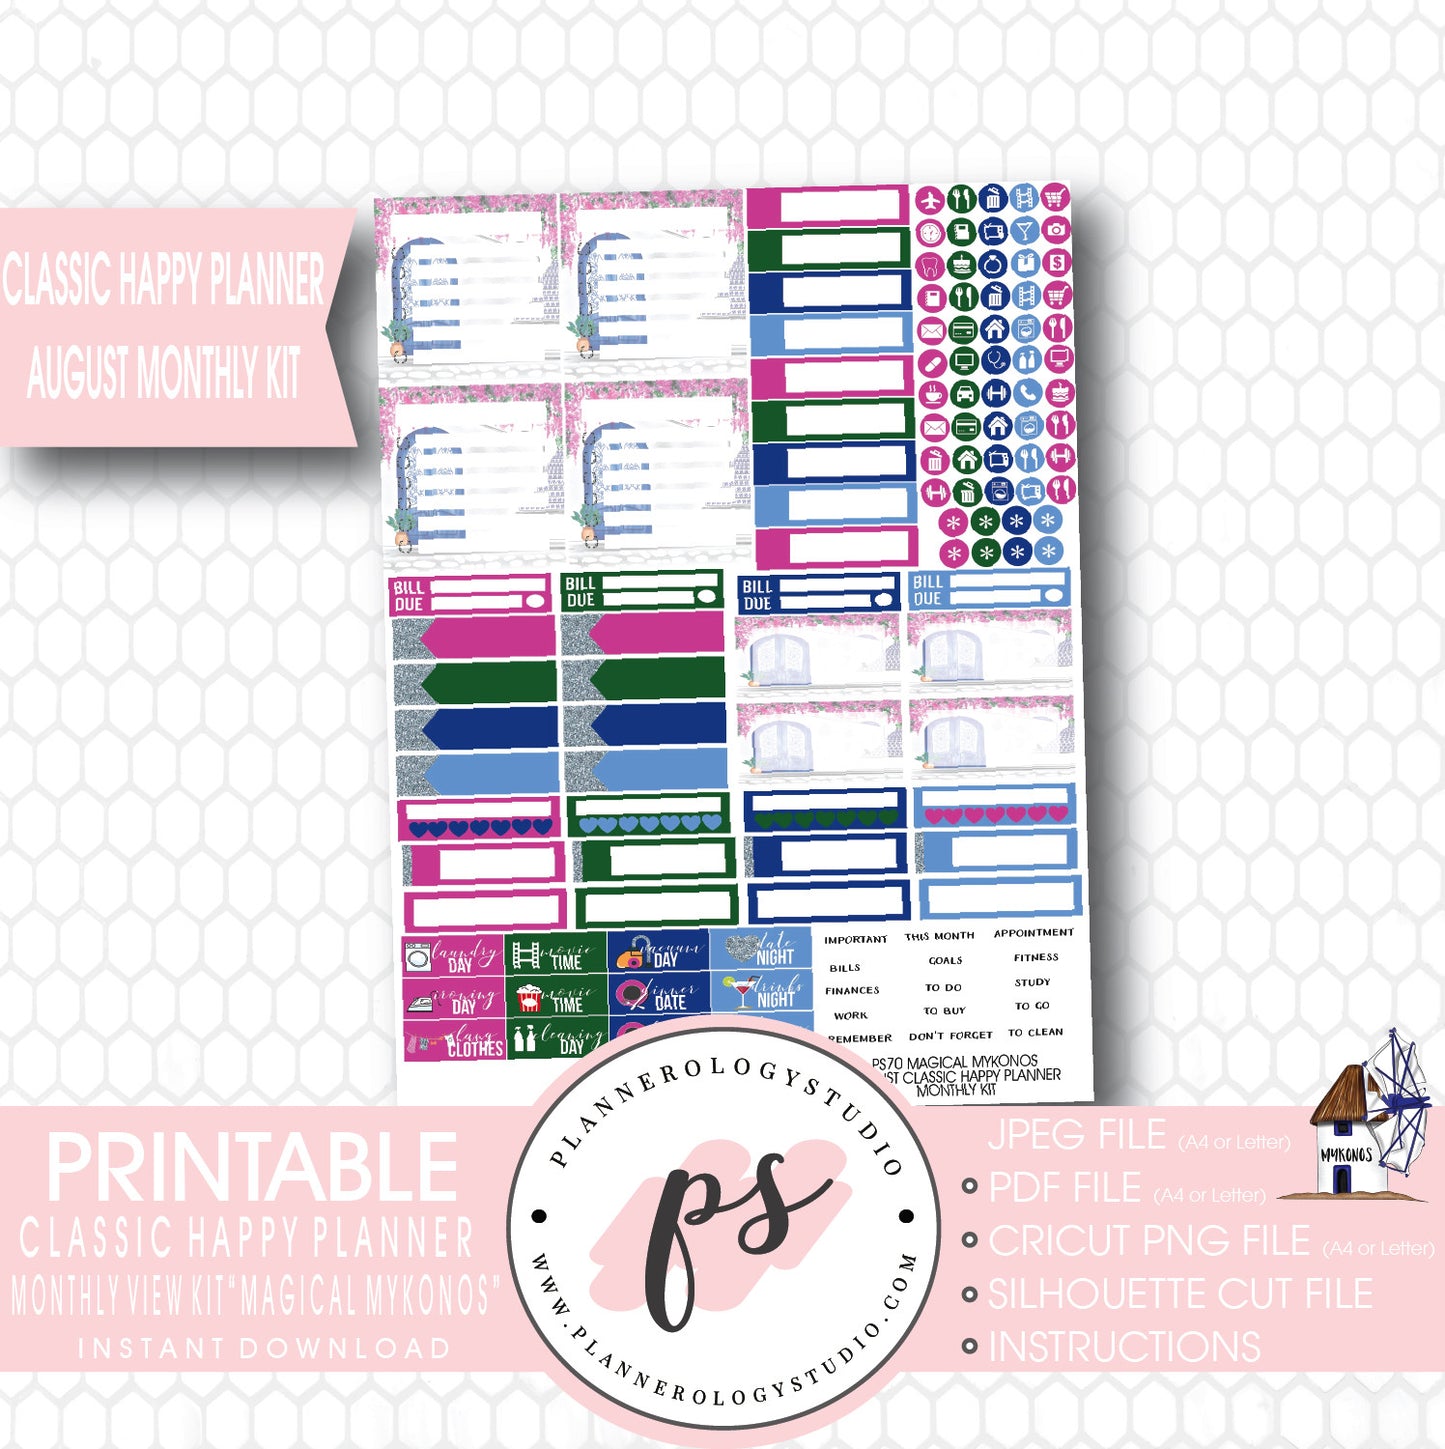 "Magical Mykonos" August 2017 Monthly View Kit Printable Planner Stickers (for use with Mambi Classic Happy Planner) - Plannerologystudio